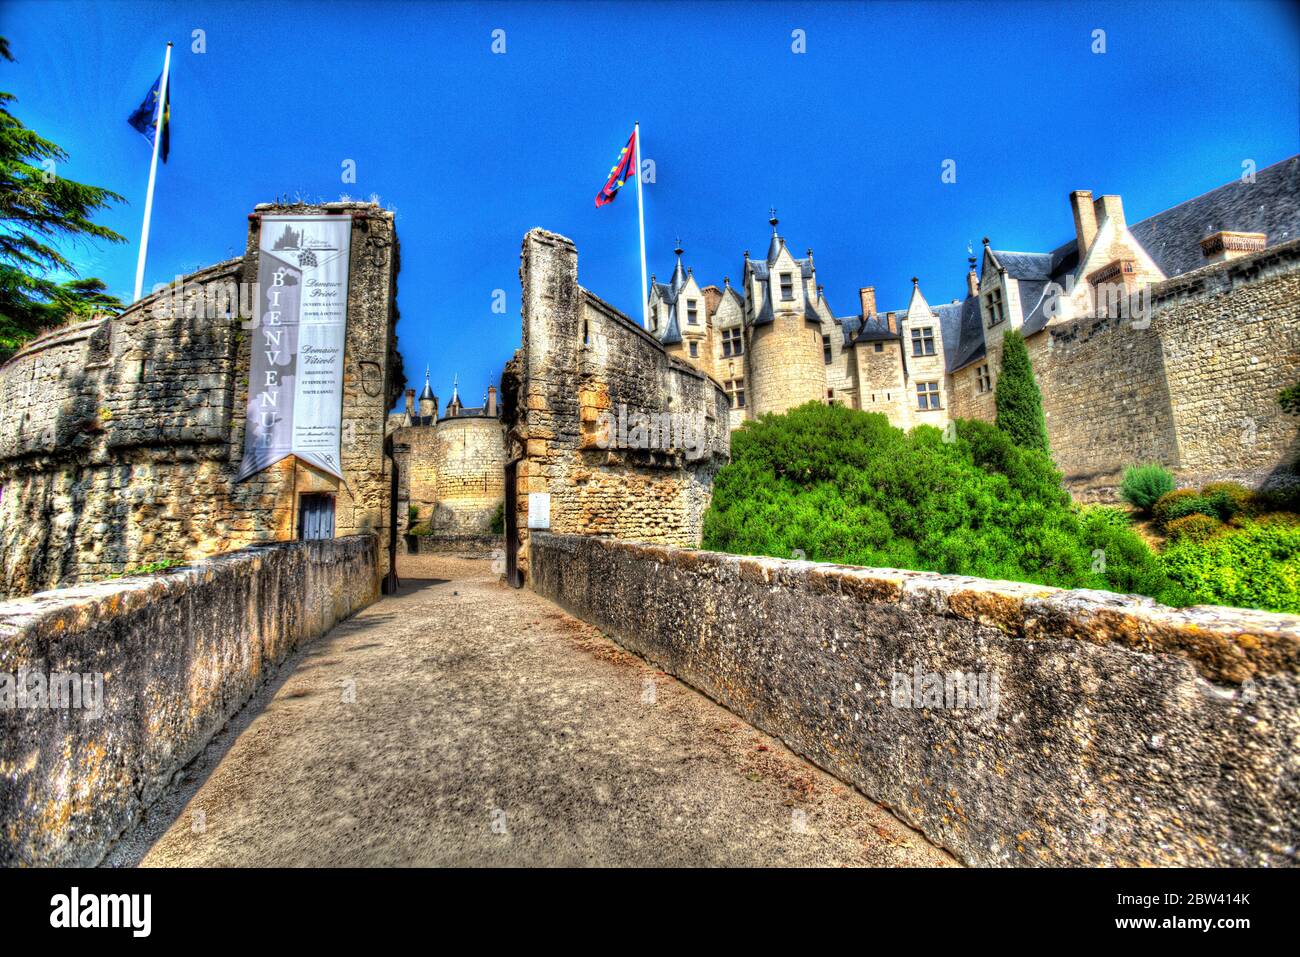 Town of Montreuil-Bellay, France. Artistic view of the historic Chateau Montreuil-Bellay. Stock Photo